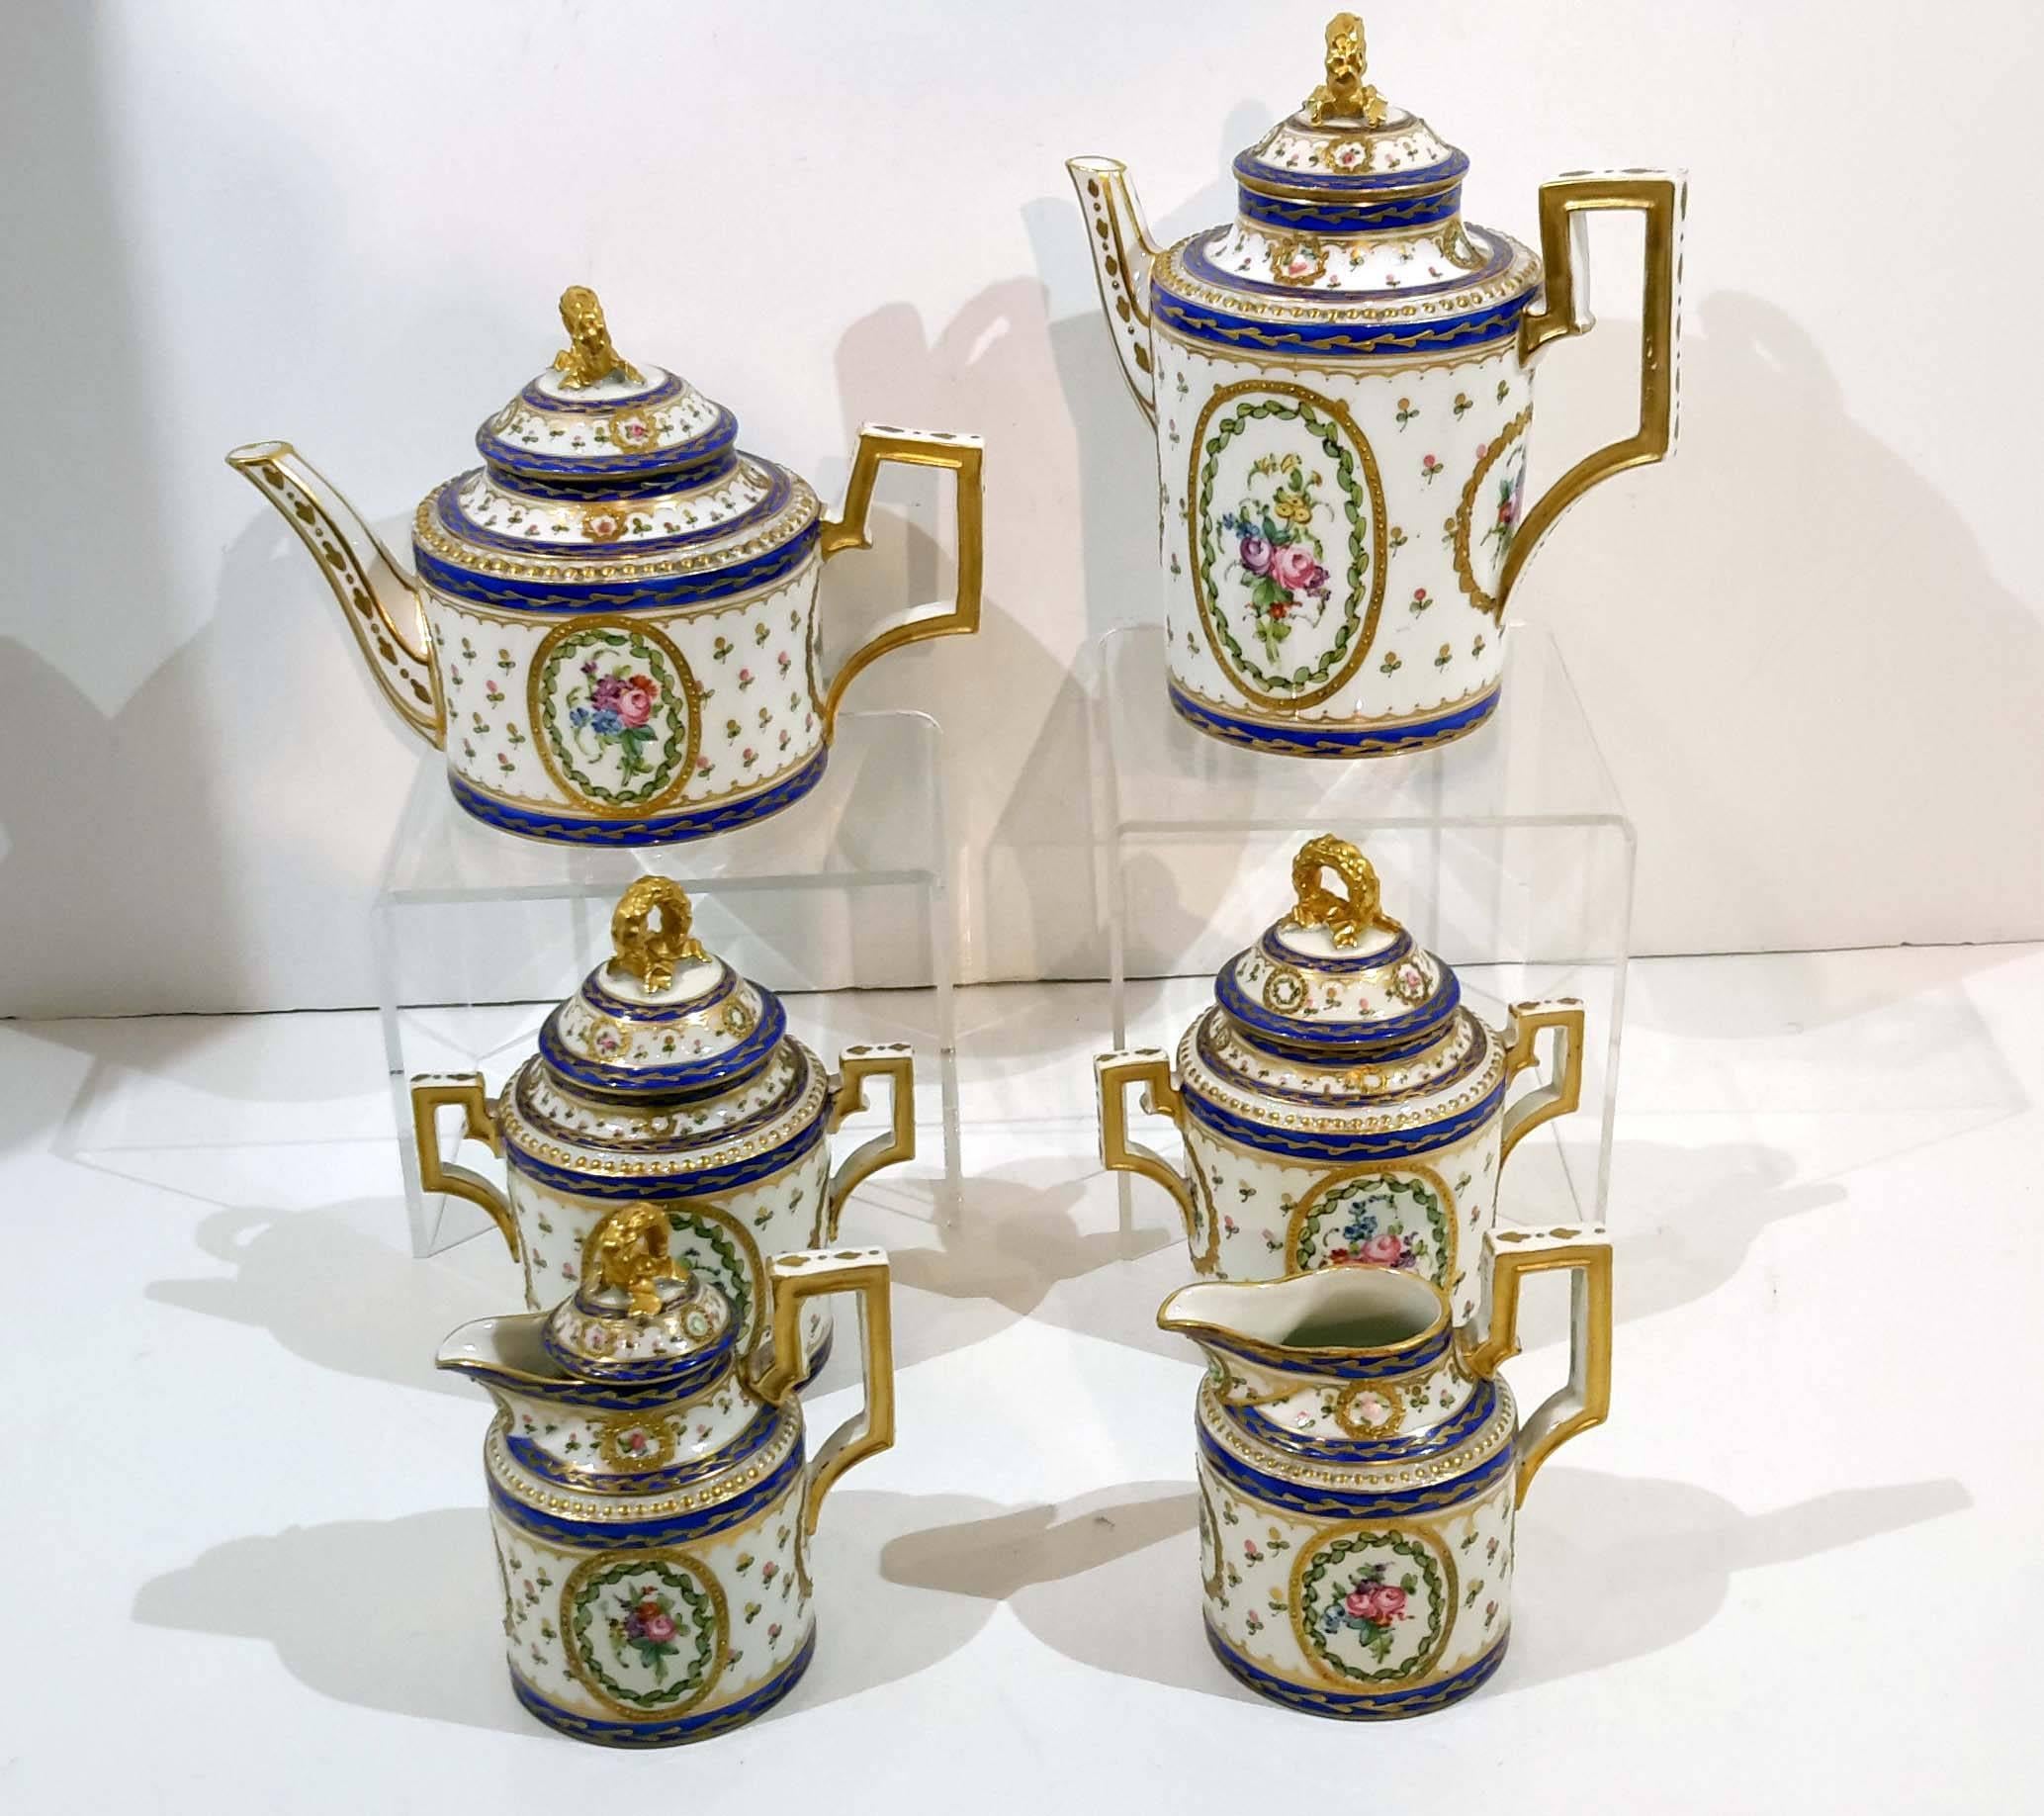 Raised gilding and hand-painted floral decoration on a white porcelain background with underglazed cobalt bands, in great condition.
Marks of Samson porcelain manufacturing, circa mid-19th century.
There are two creamers, one without lid. there